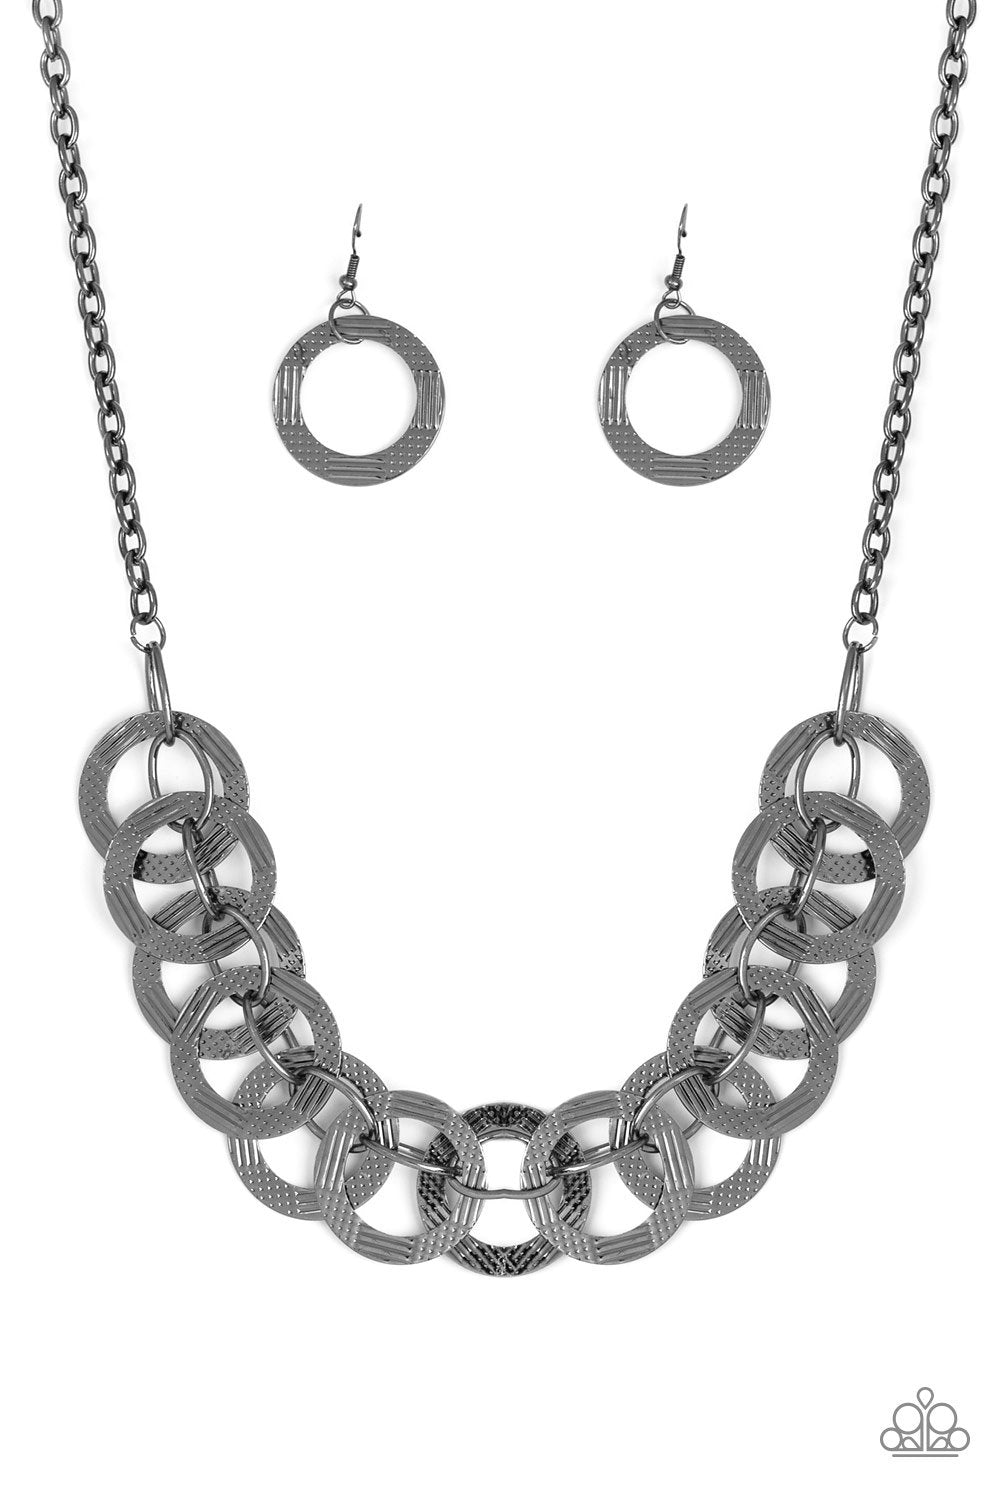 The Main Contender Black Gunmetal Necklace and matching Earrings - Paparazzi Accessories-CarasShop.com - $5 Jewelry by Cara Jewels